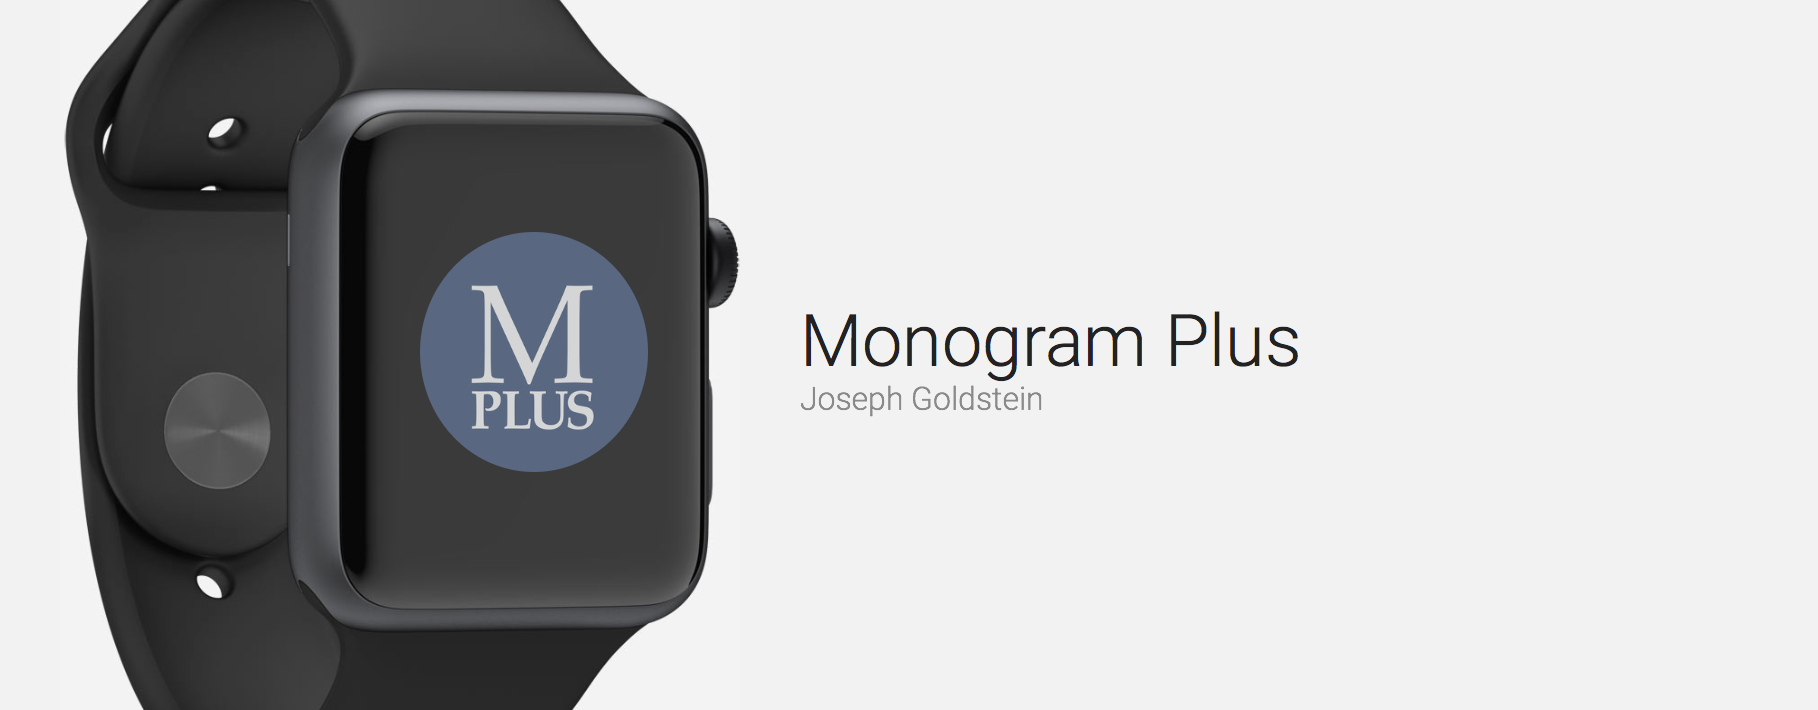 Monogram Plus lets you truly customize your Apple Watch face